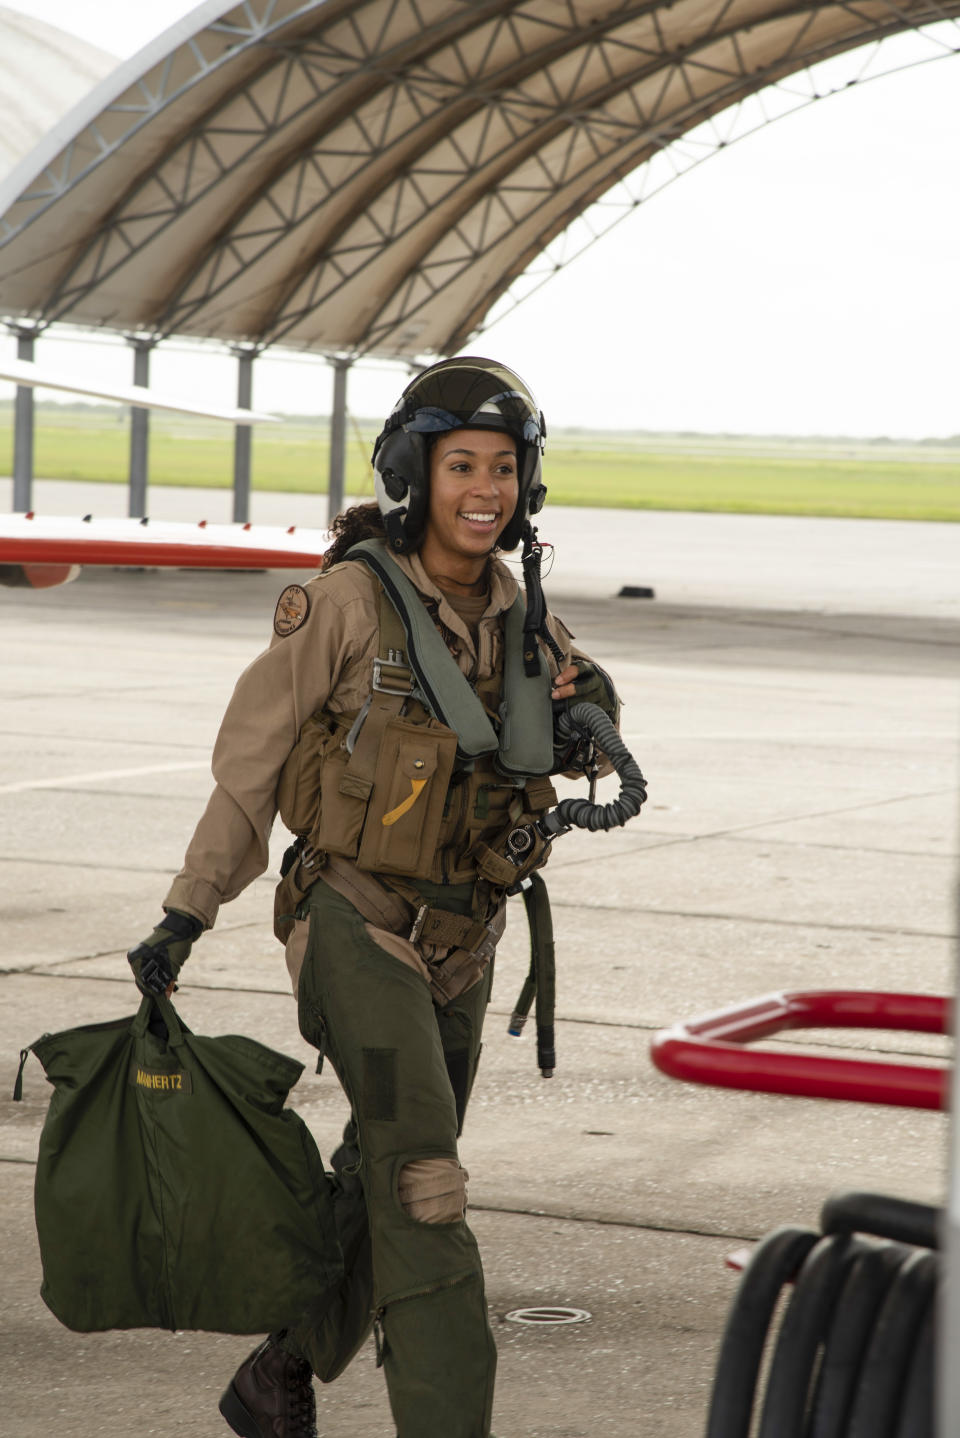 Student Naval Aviator Lt. j.g. Madeline Swegle, assigned to the Redhawks of Training Squadron (VT) 21 at Naval Air Station Kingsville, Texas, exits a T-45C Goshawk training aircraft following her final flight to complete the undergraduate Tactical Air (Strike) pilot training syllabus, July 7. Swegle is the U.S. Navy's first known Black female strike aviator and will receive her Wings of Gold during a ceremony July 31. | U.S. Navy photo by Anne Owens/Released